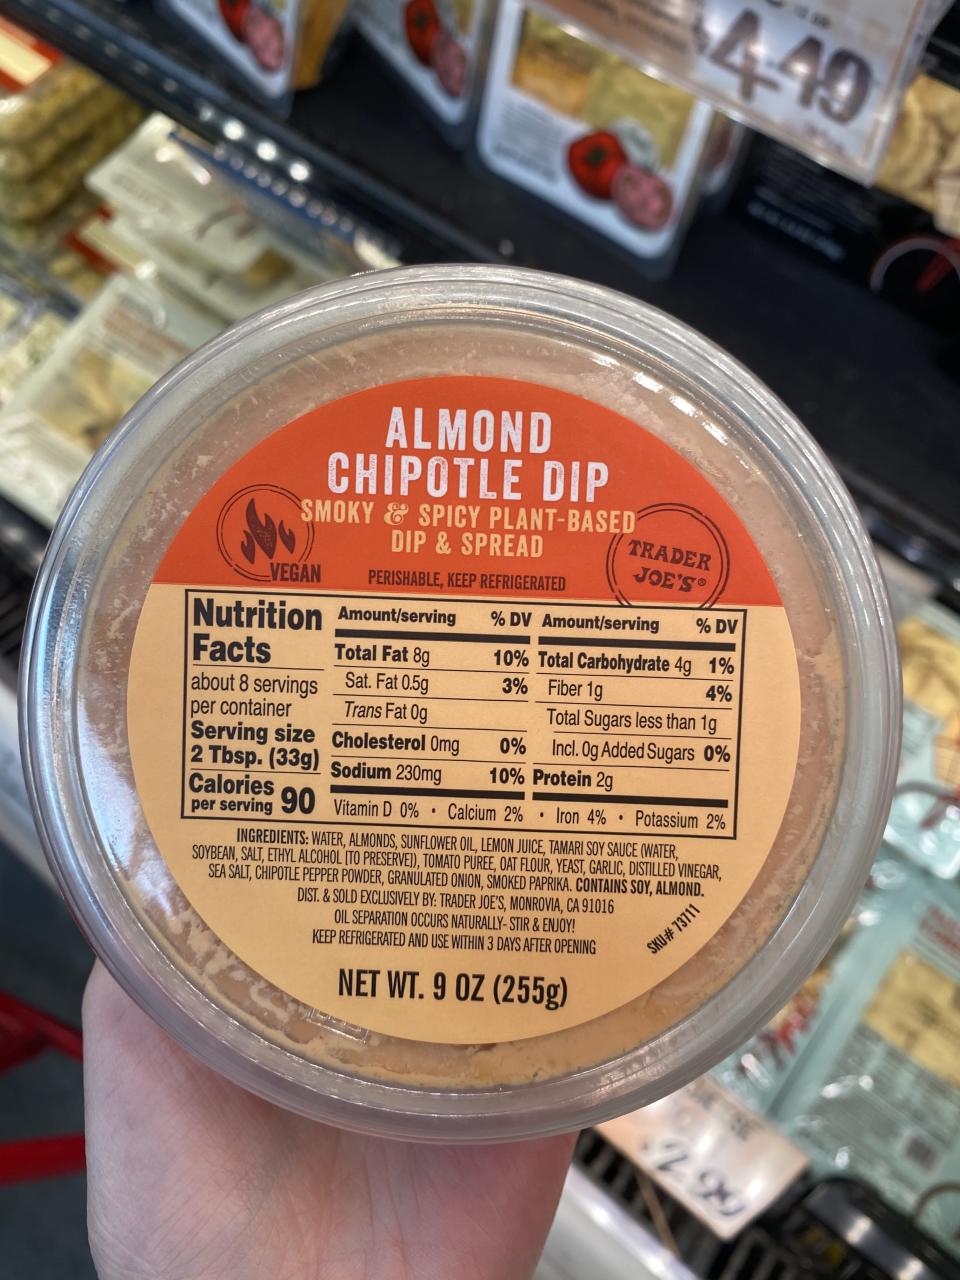 a container of trader joe's almond chipotle dip